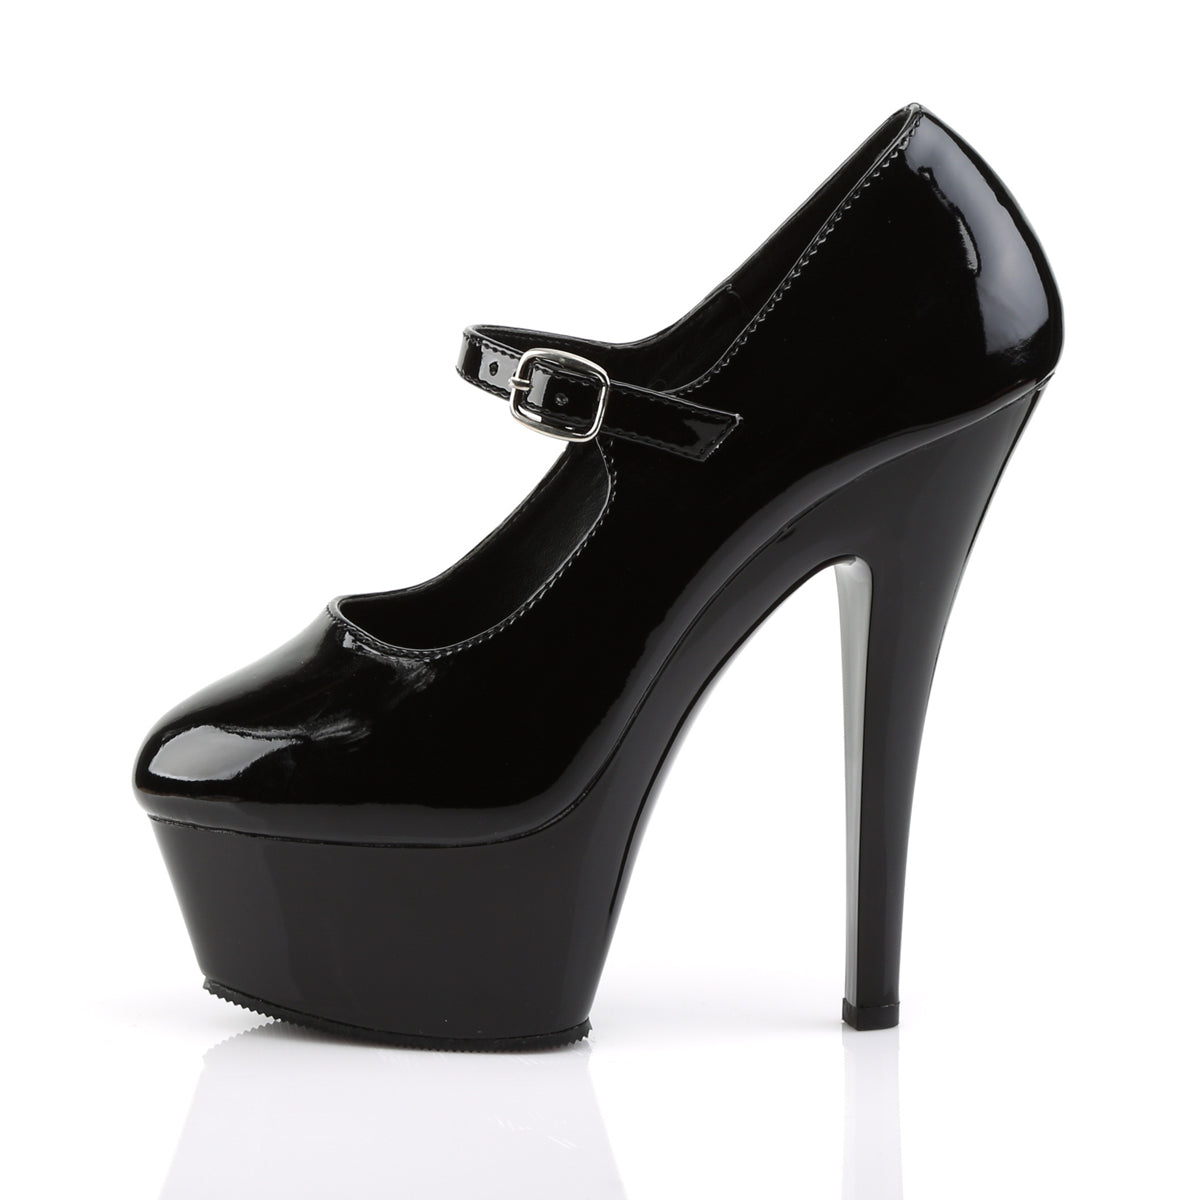 KISS-280 Black Patent Mary Janes Pleaser